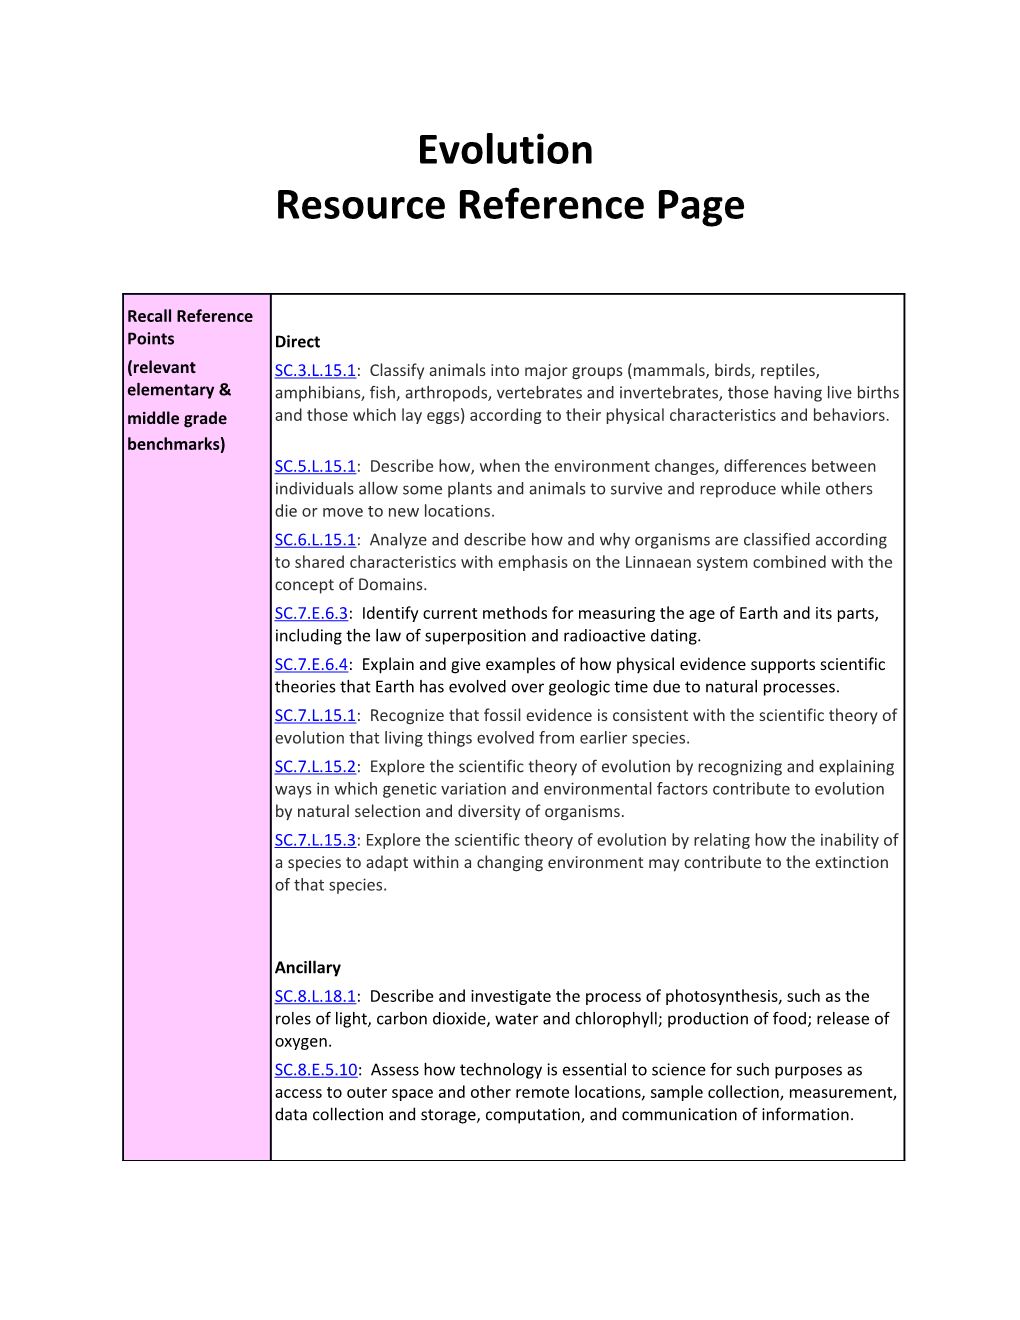 Resource Reference Page